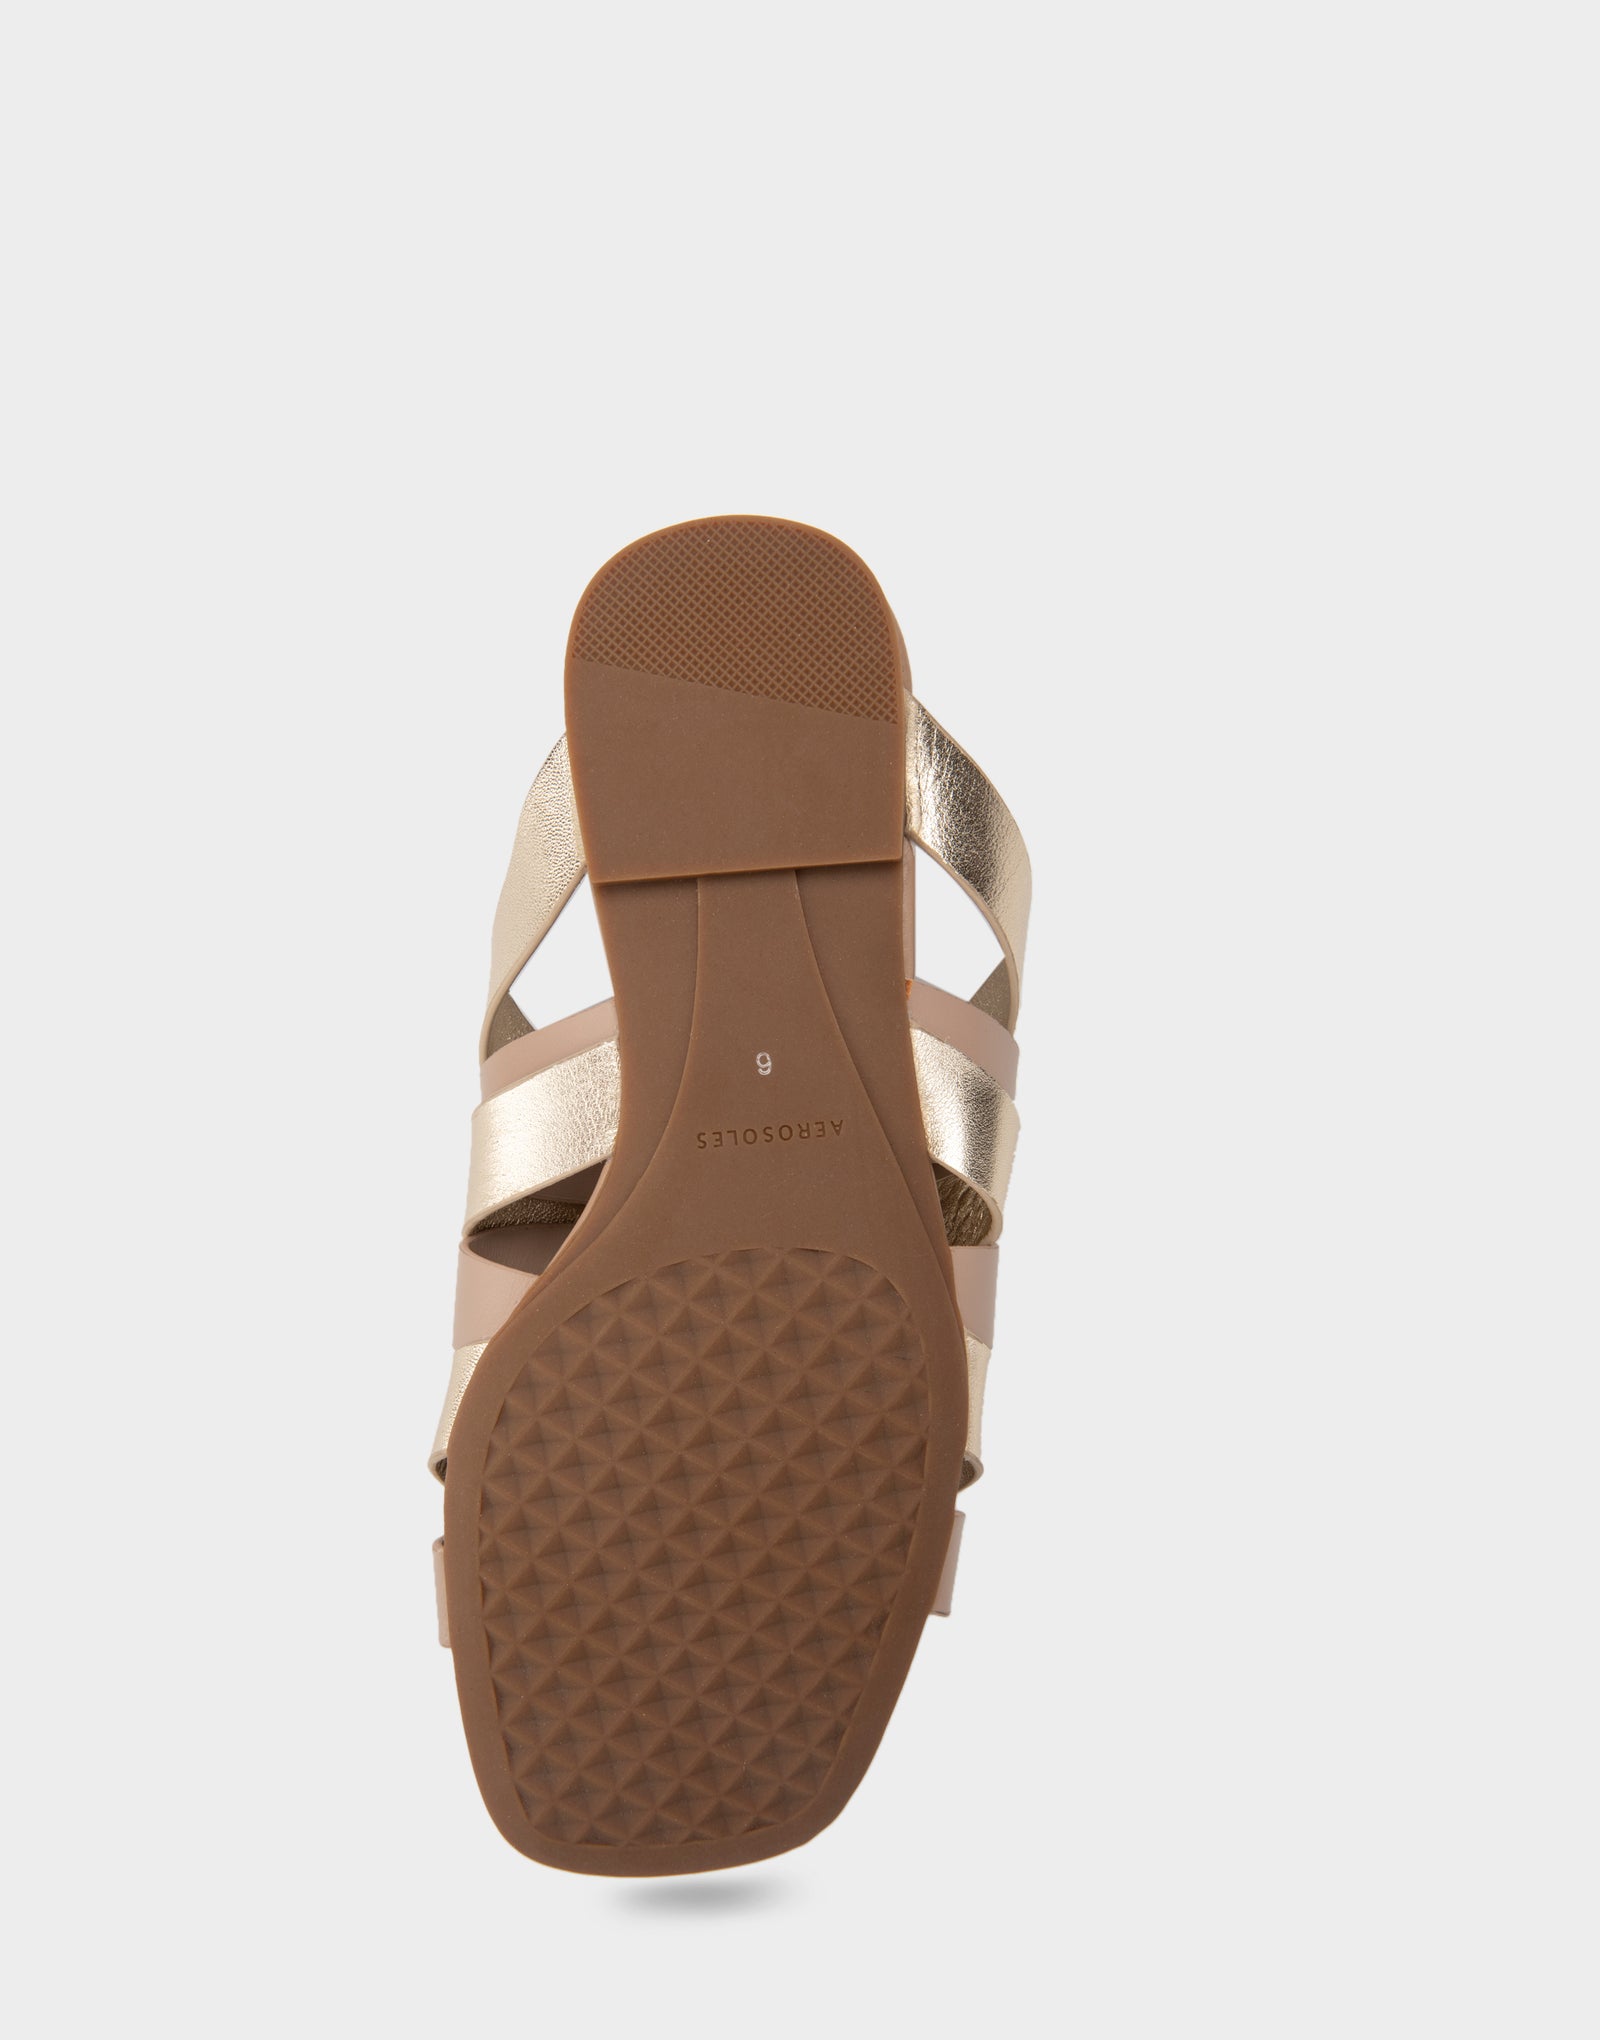 Women's Flat Sandal in Taupe